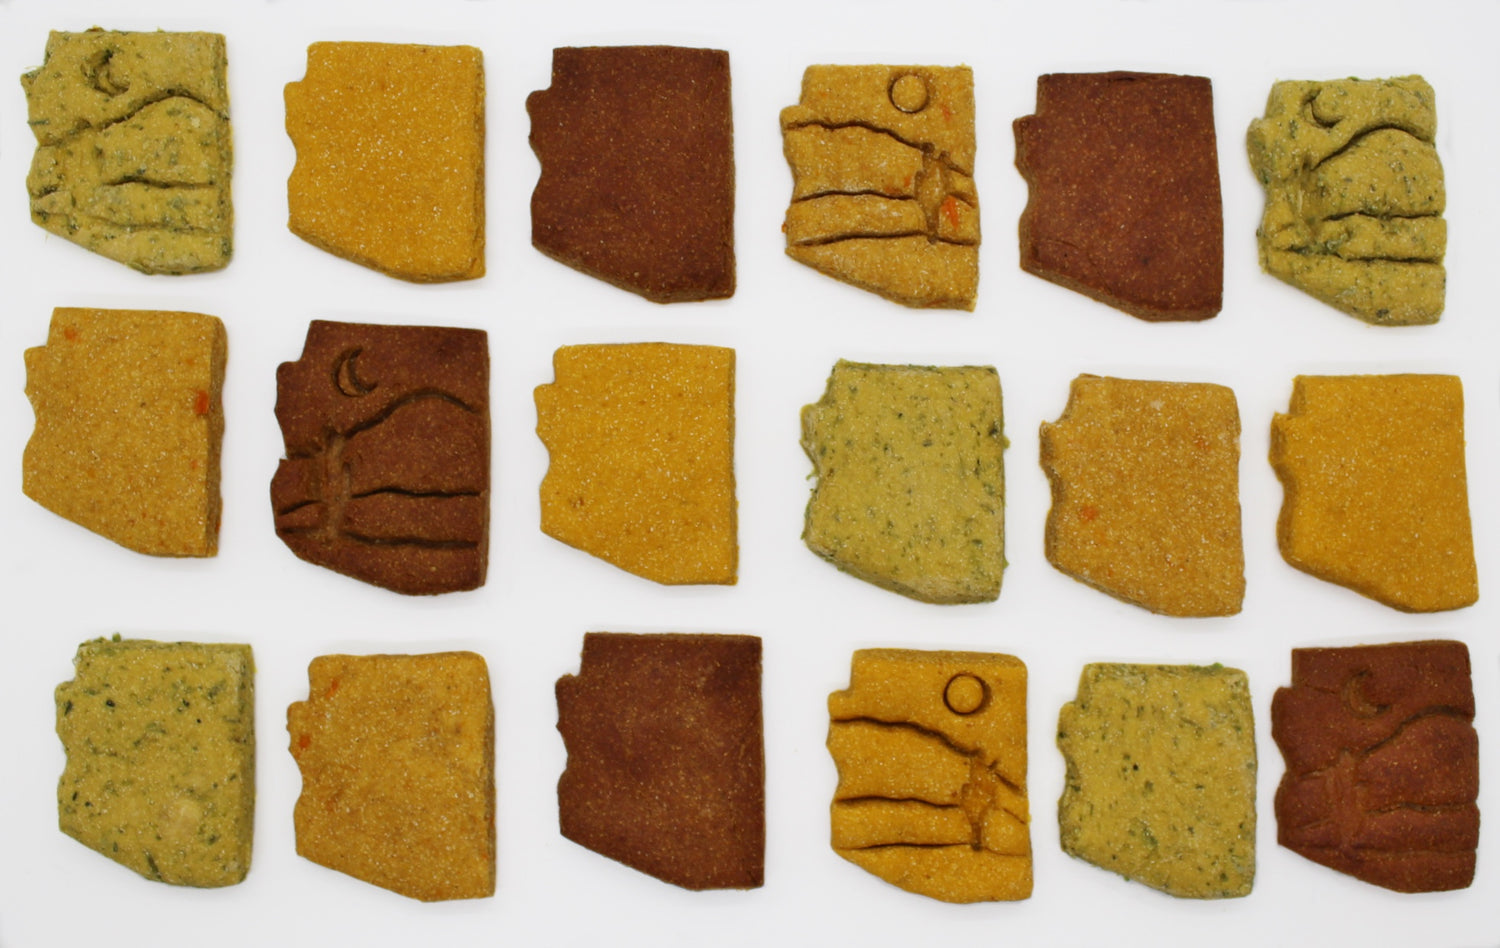 18 dog biscuits are placed in three rows of six on a white surface. The dog biscuits are all cut in the shape of the state of Arizona. Six of the biscuits have a desert motif stamped into them. The biscuits are placed randomly with the flavors of biscuits ranging from Broccoli and Peas, Sweet potato and Carrots, Pumpkin, and Peanut butter and Banana.